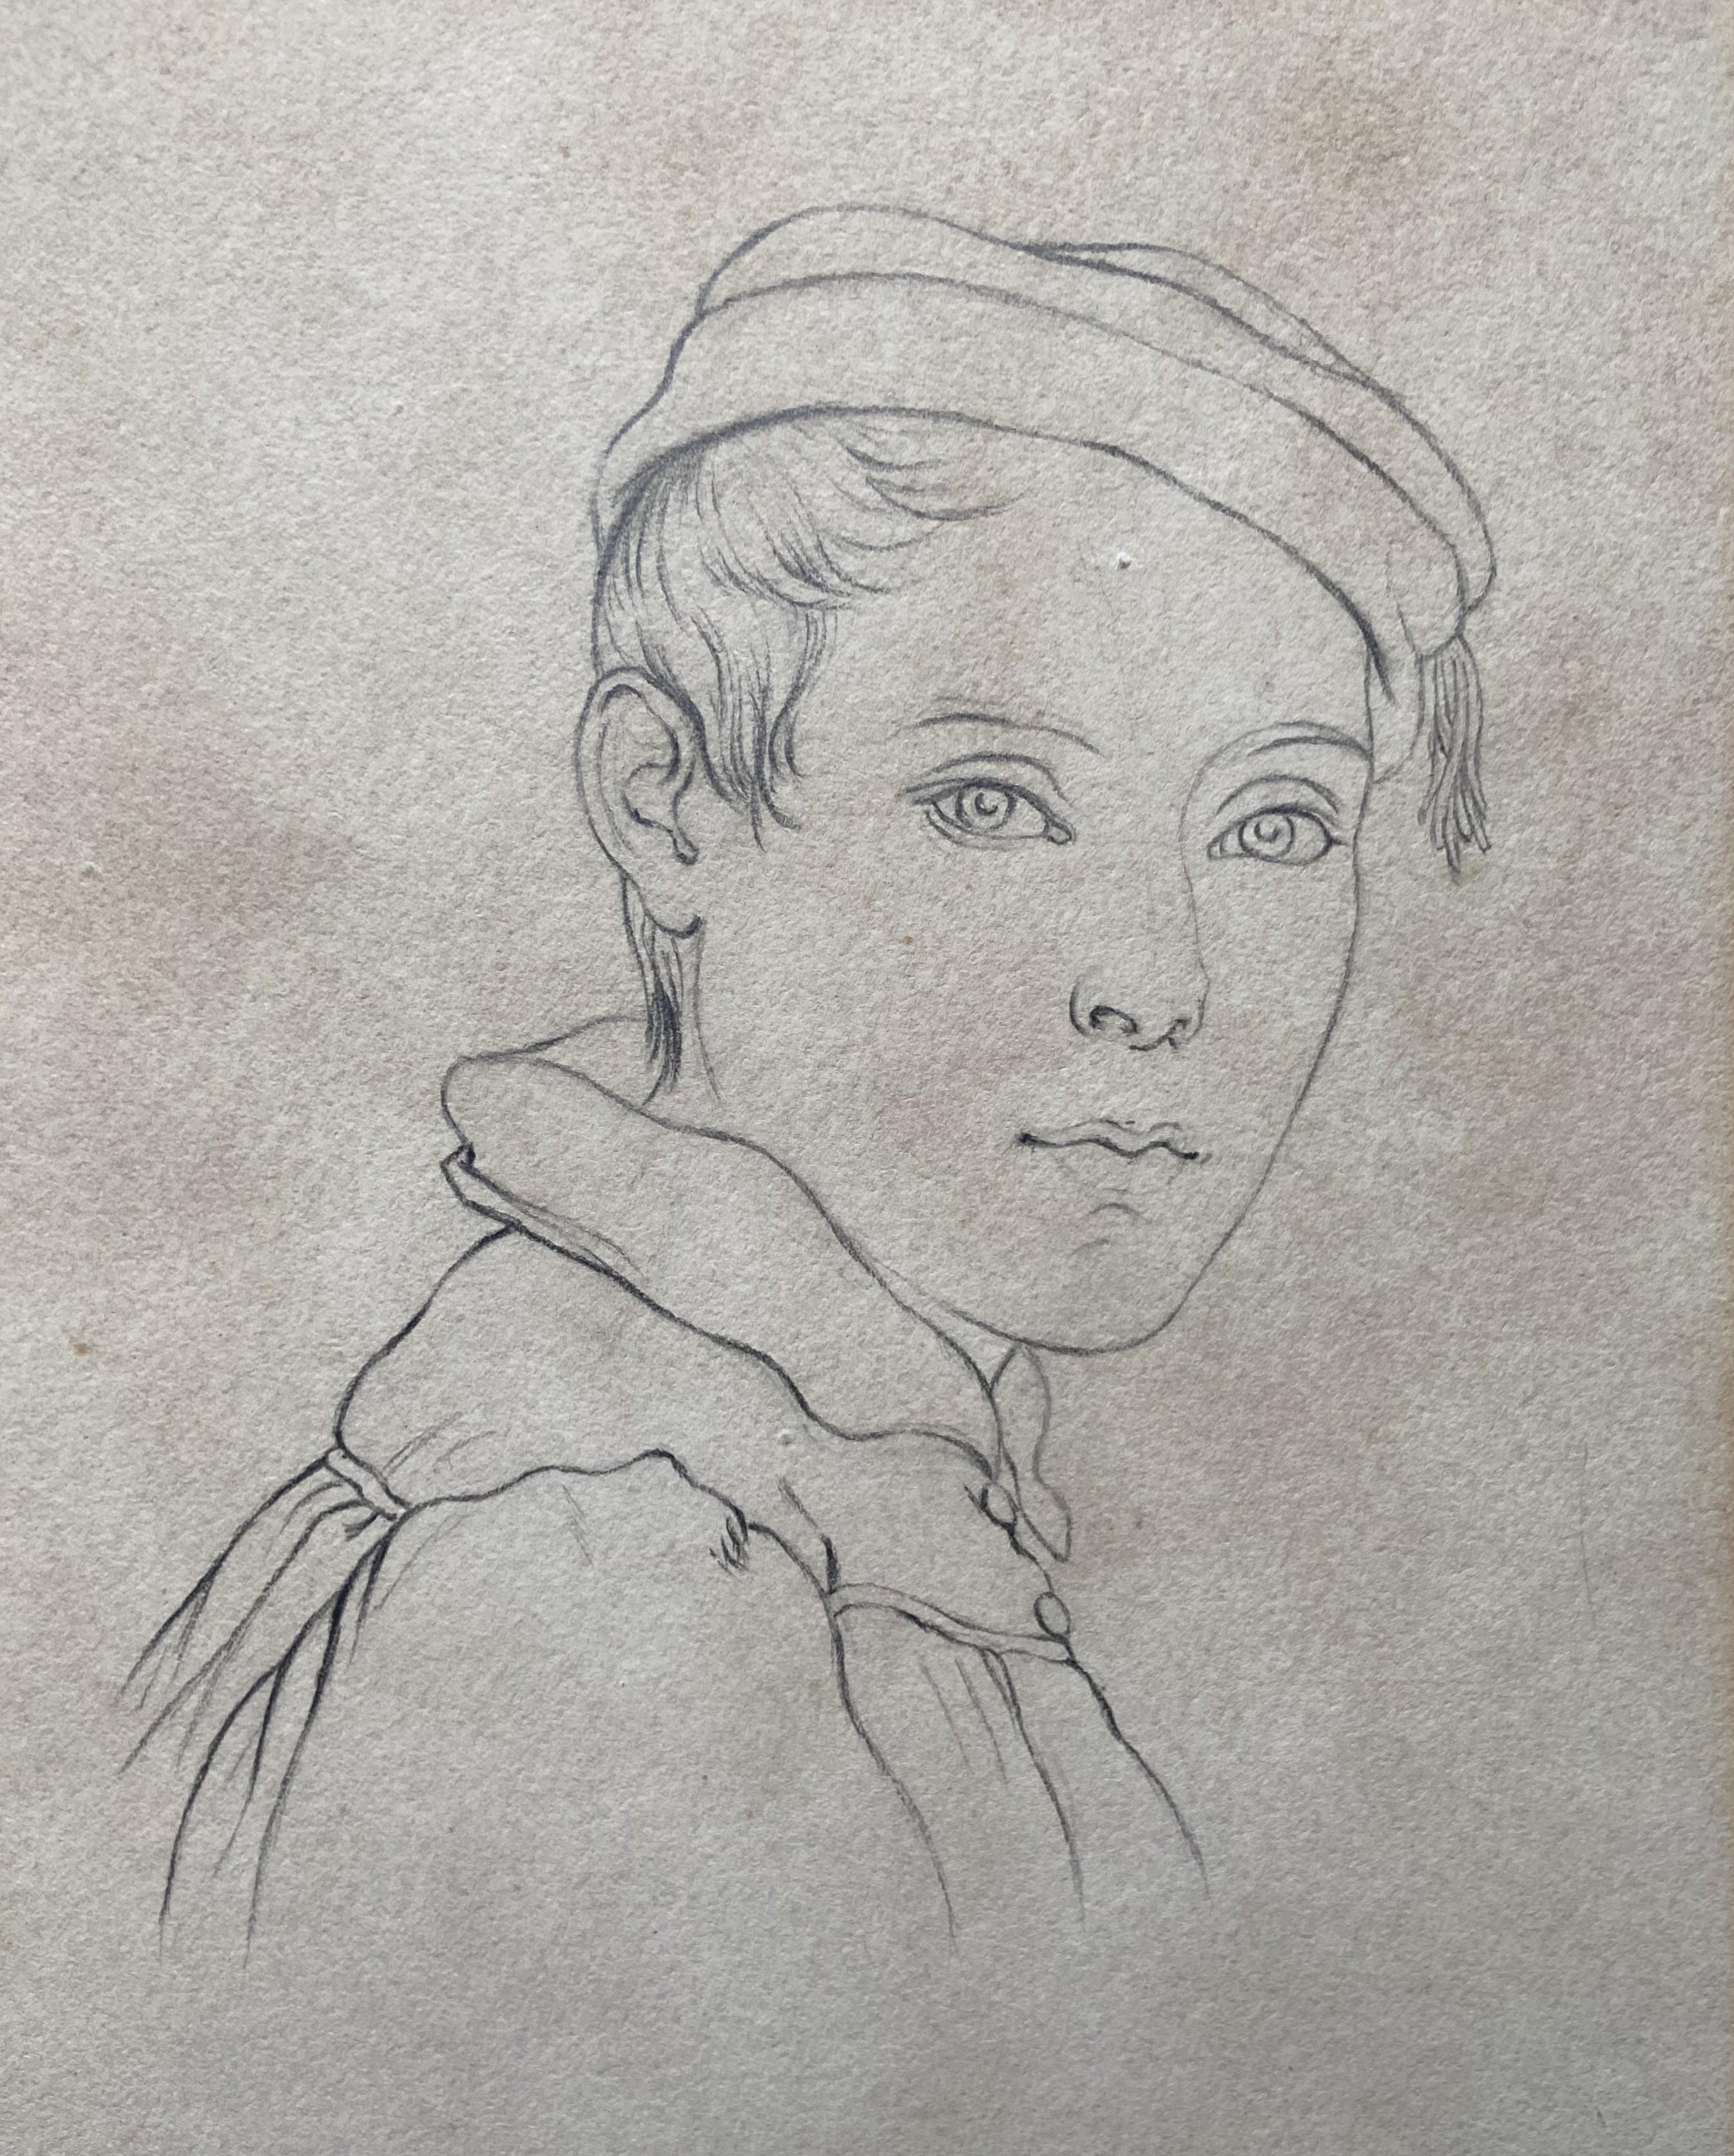 German School 19th Century, 
Portrait of a boy, 
pencil on paper
25.7 x 16 cm (view)
Framed : 41.8 x 31.5 cm
 
The style and execution are very characteristic of the German Romantic school. 
Above all, the very light way of drawing, without